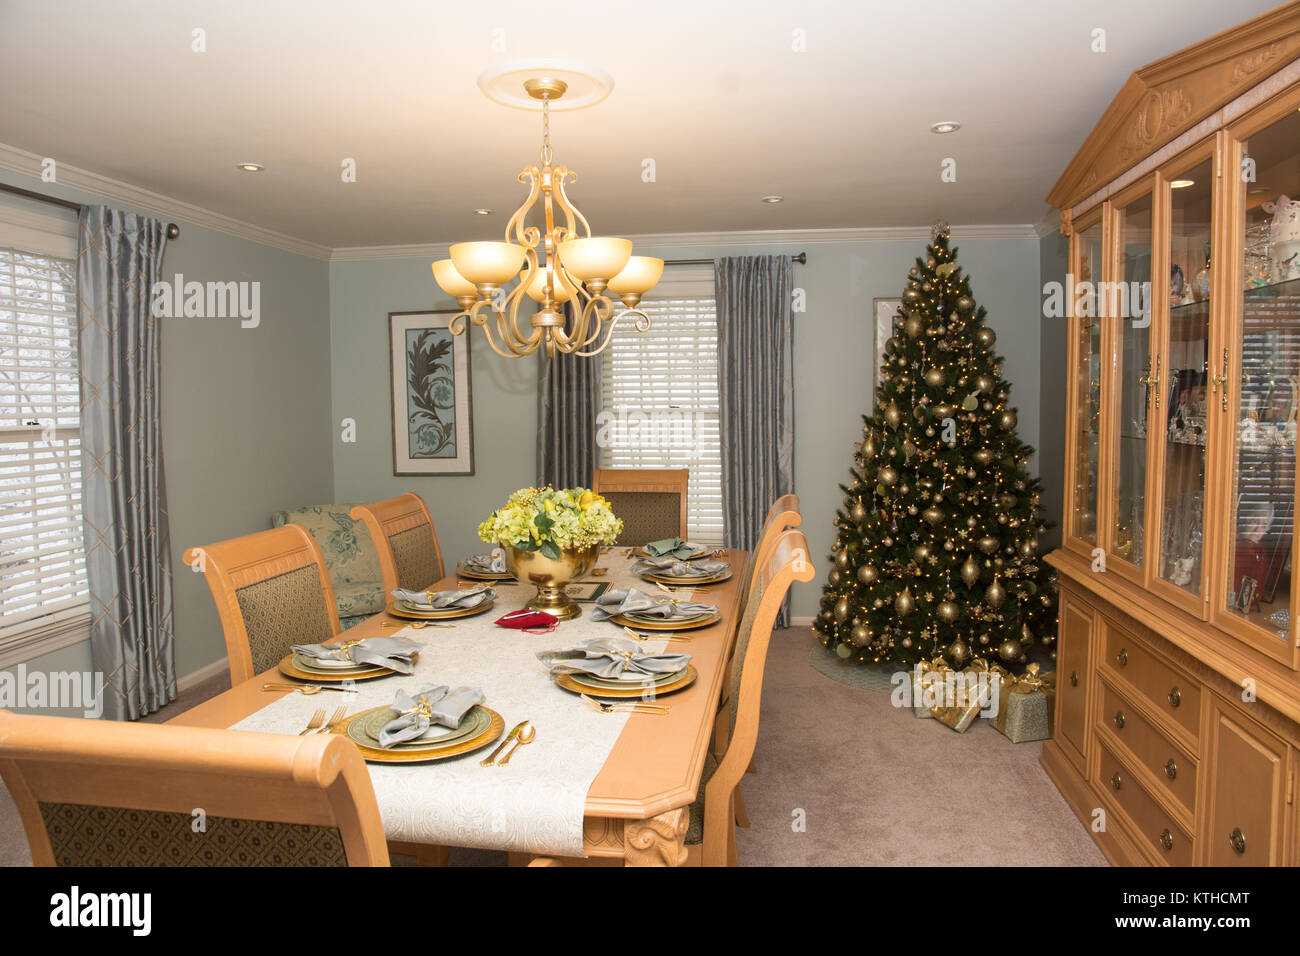 A formal dining room with table set, decorated for the Christmas holiday Stock Photo